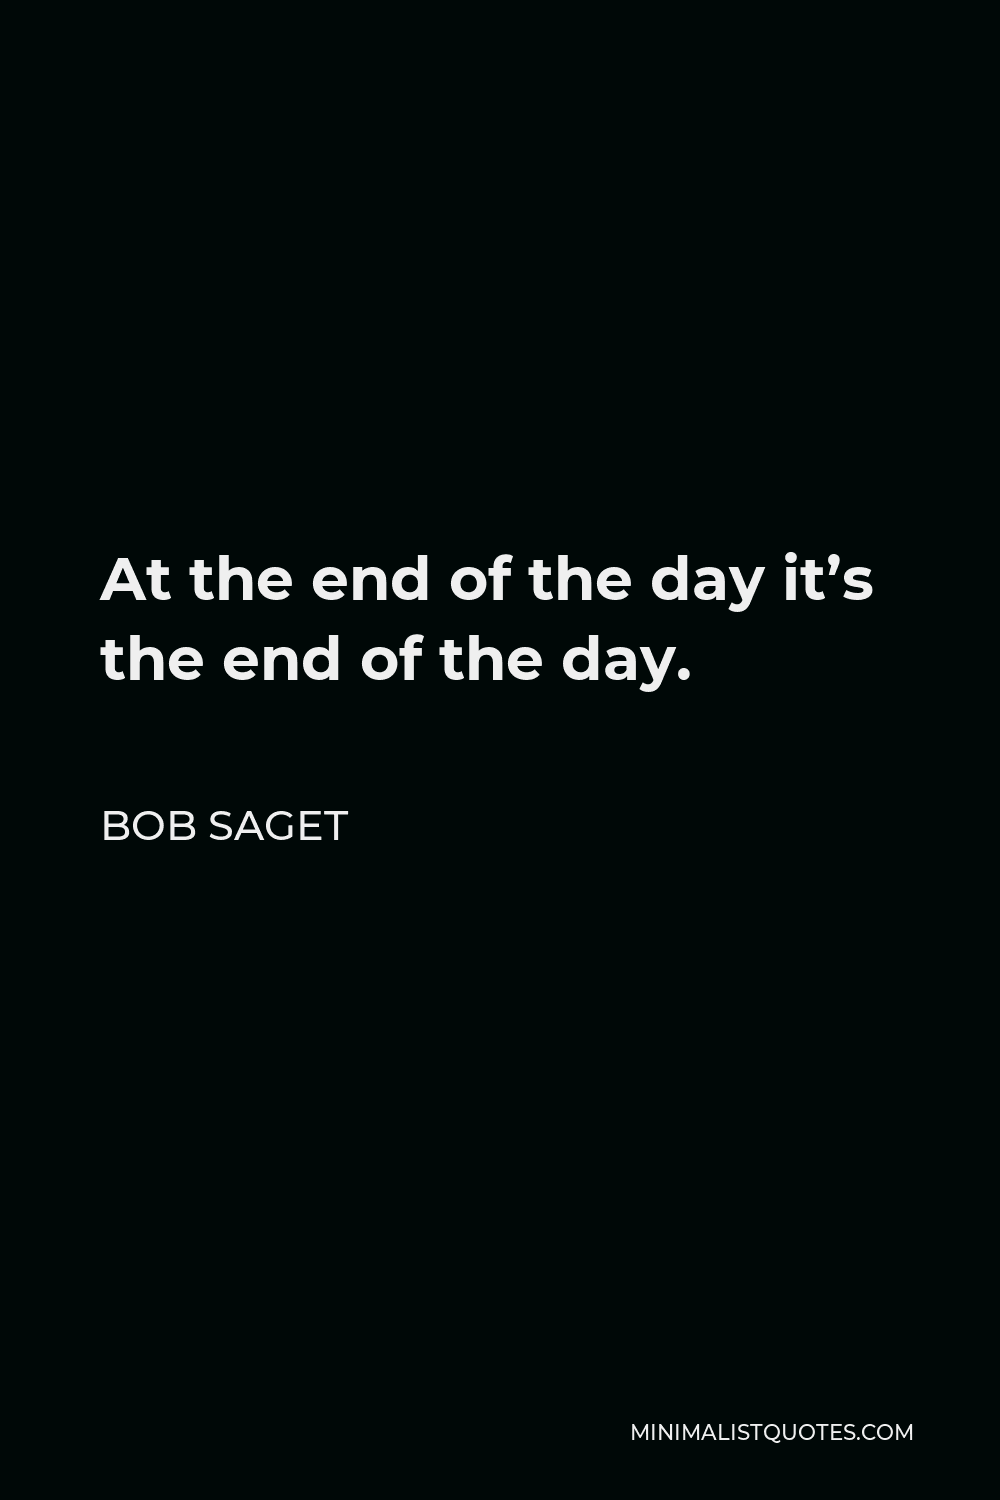 Bob Saget Quote - At the end of the day it’s the end of the day.